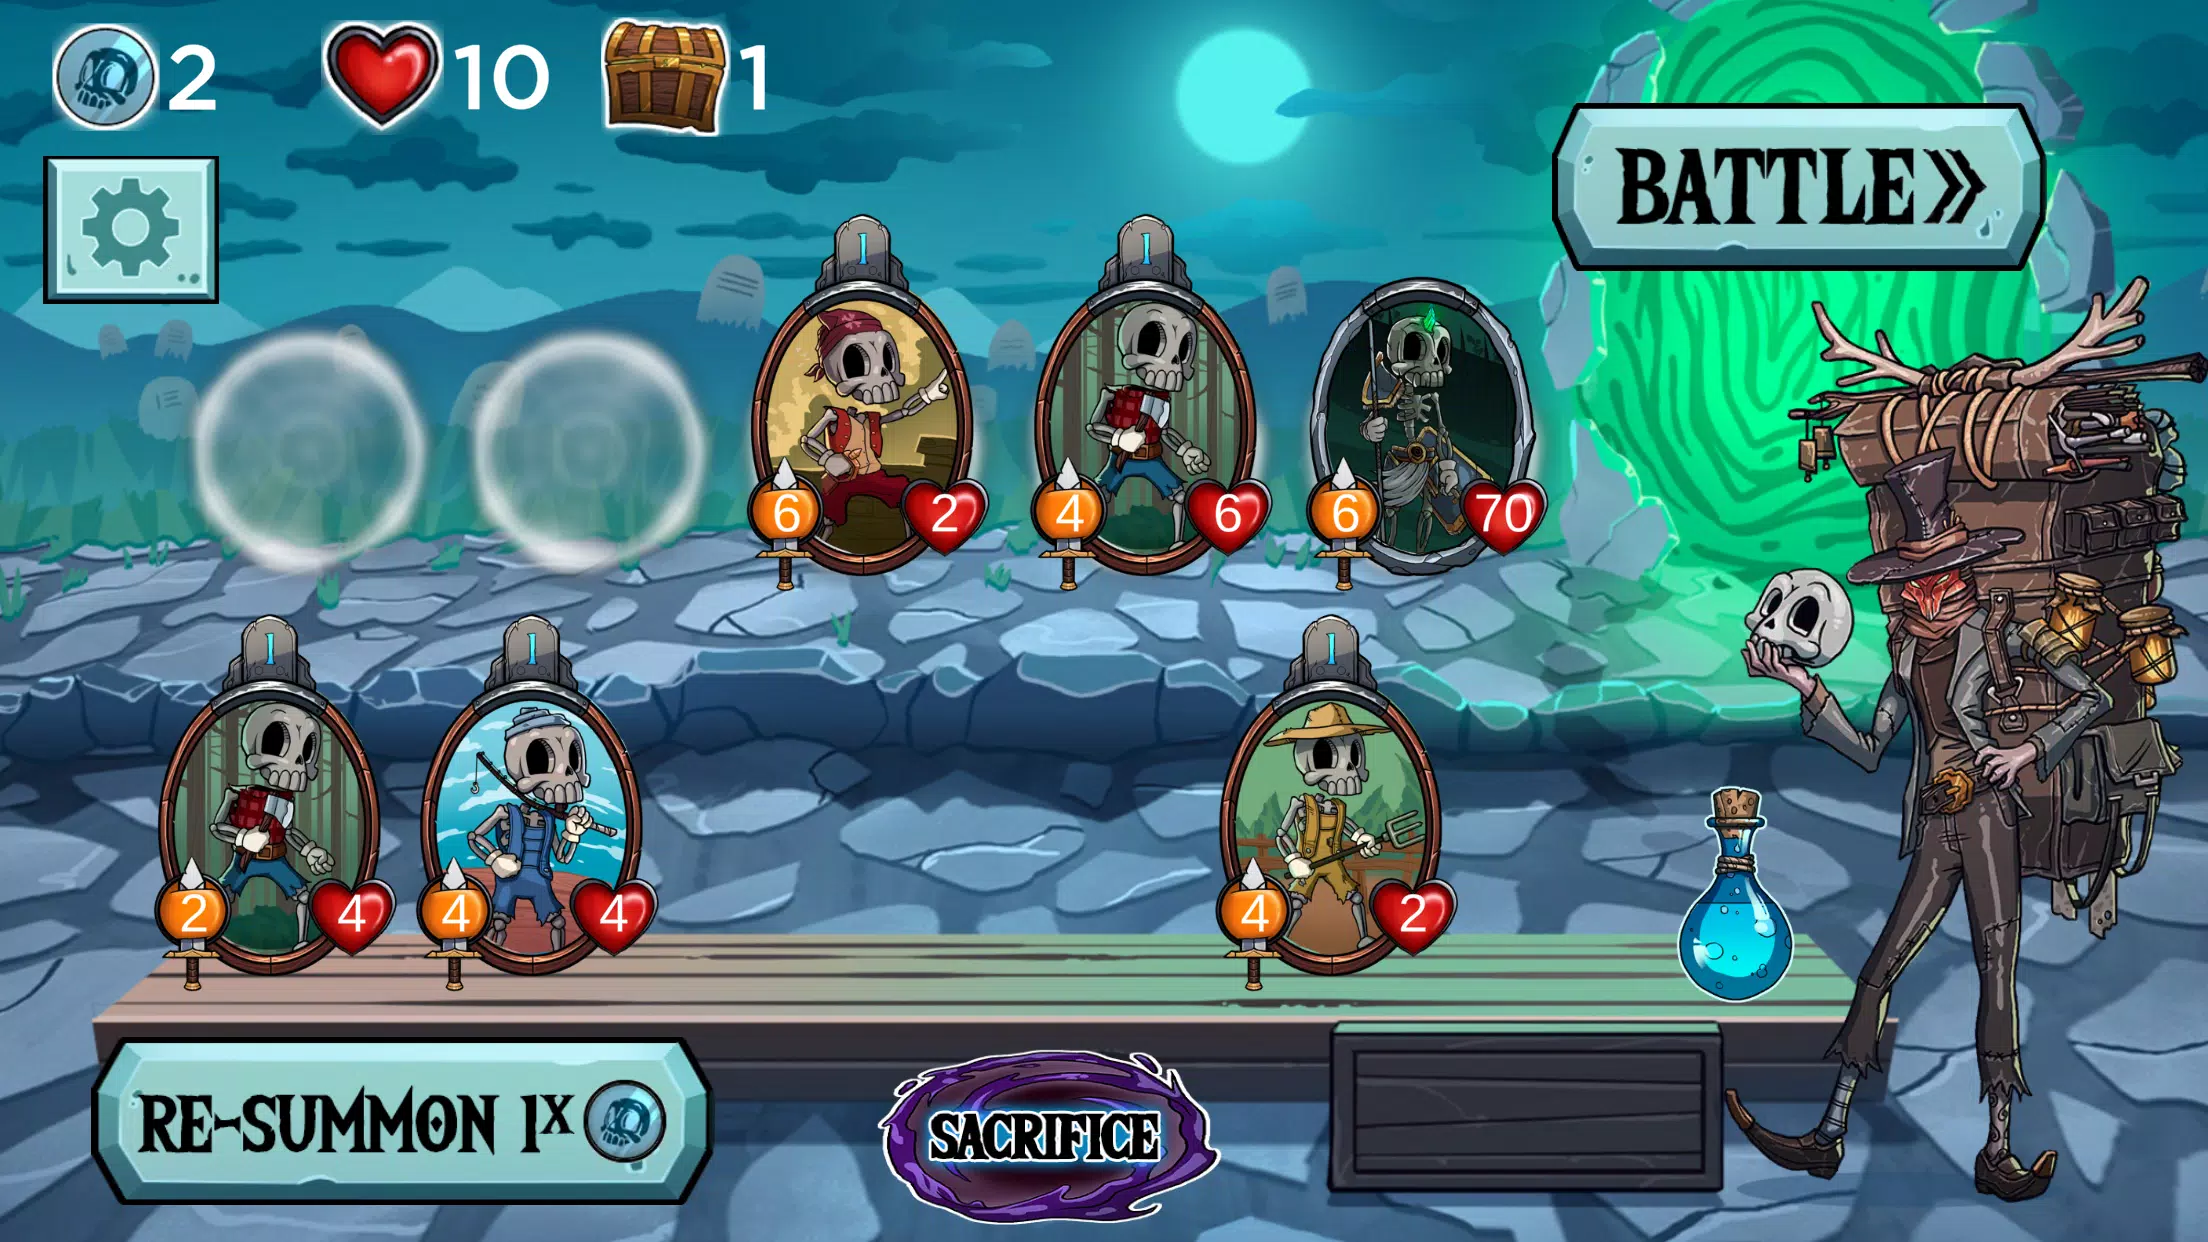 Underverse Battles for Android - Free App Download